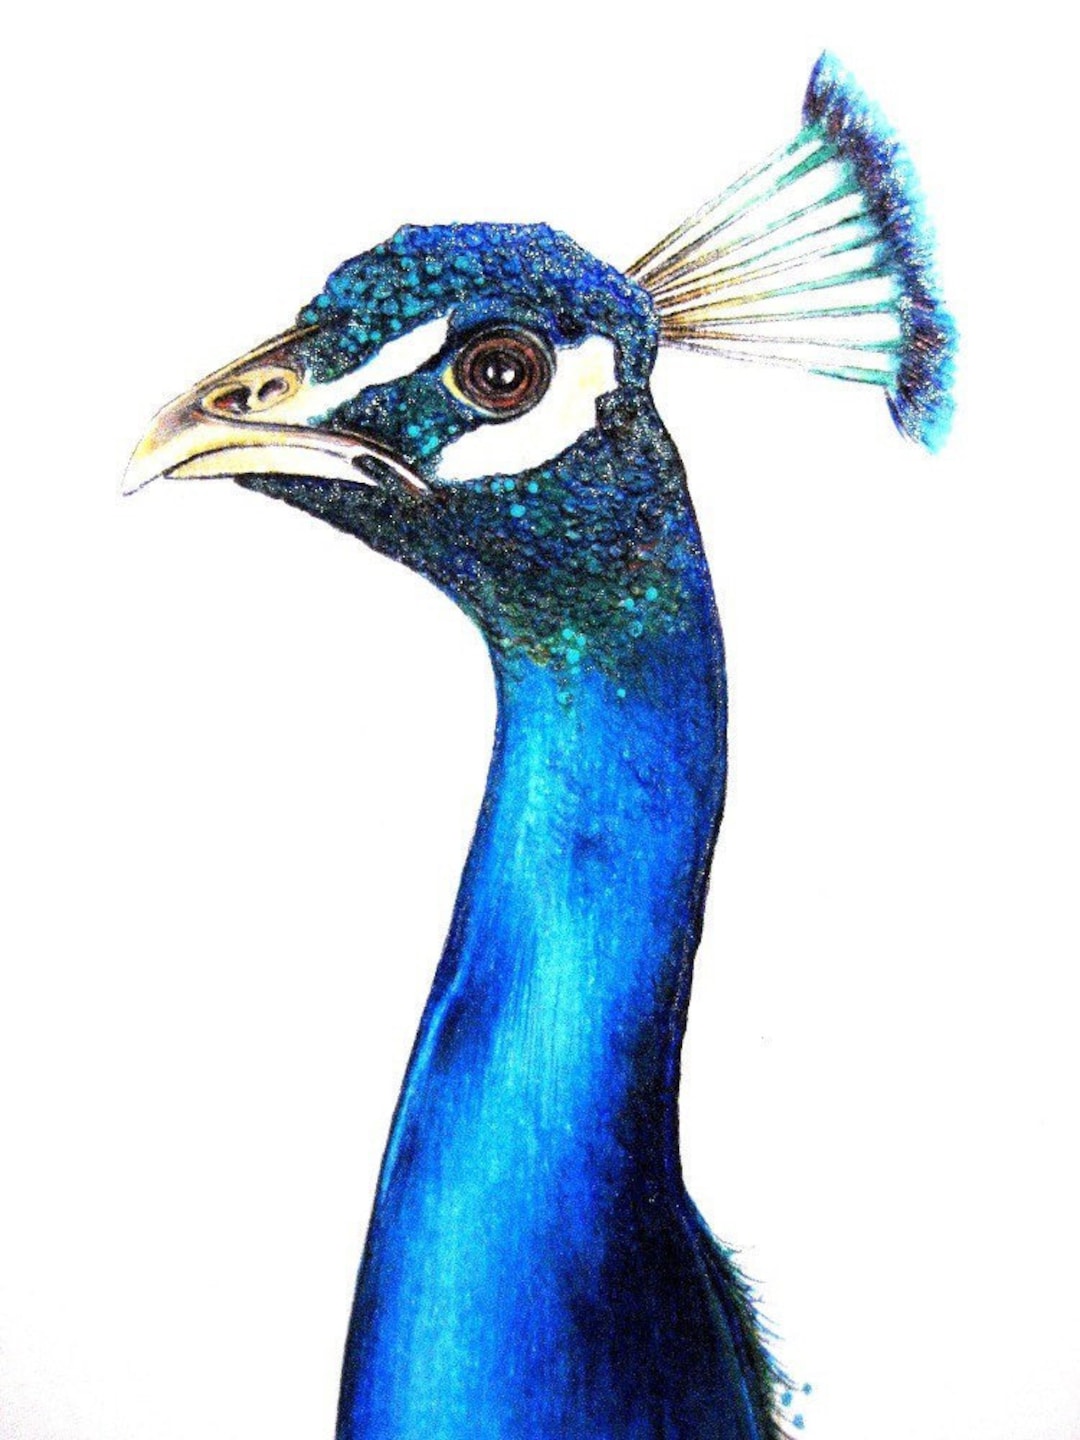 Peacock Drawing Tutorial - How to draw Peacock step by step